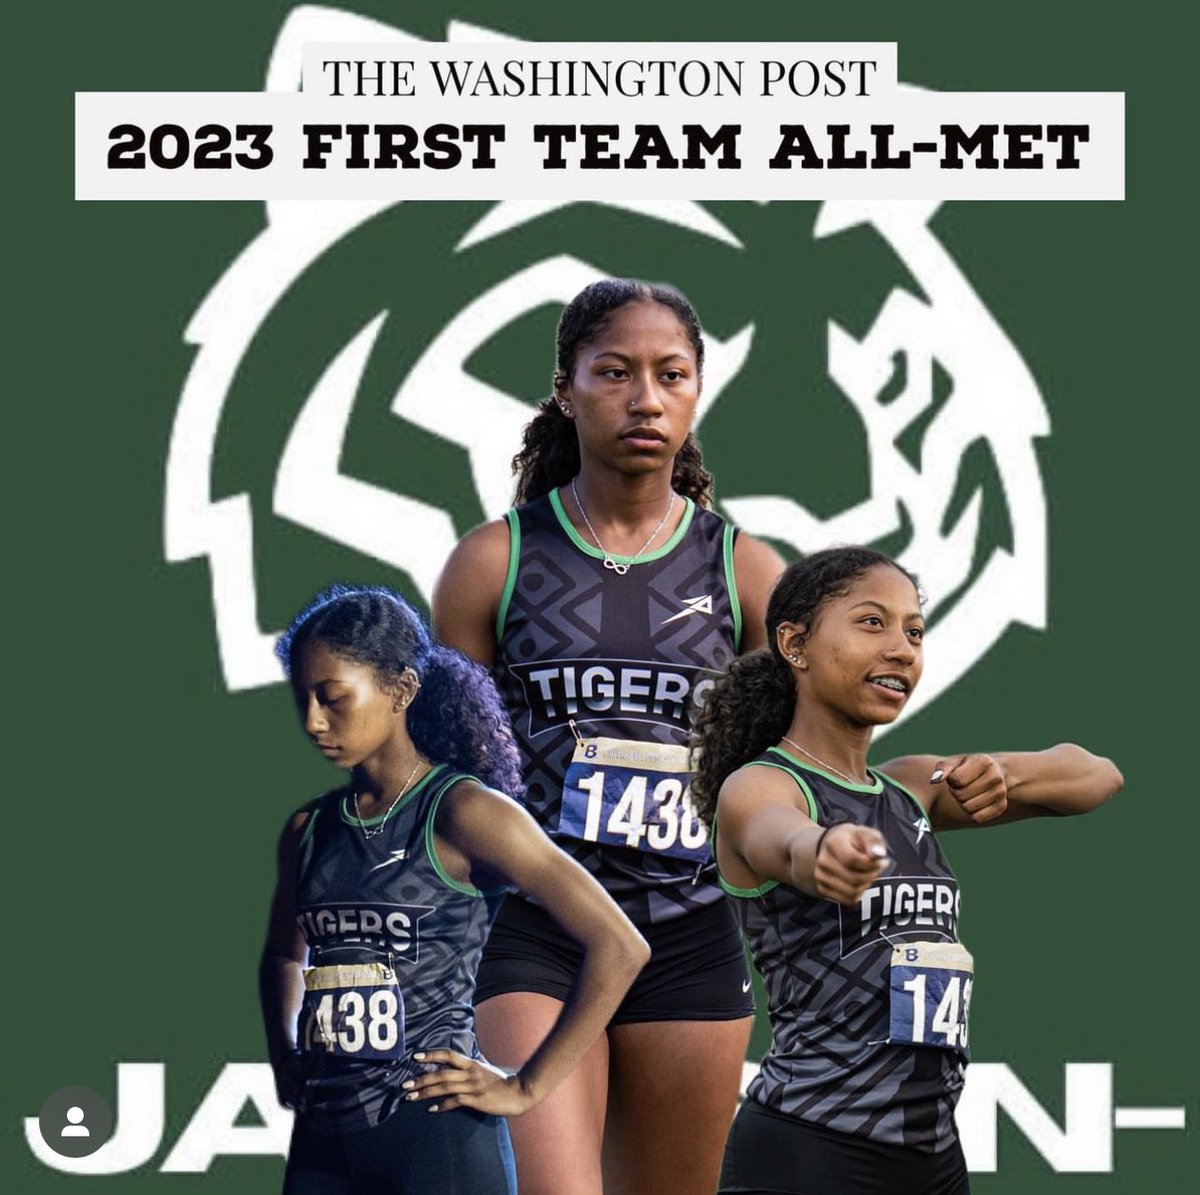 Good morning Tigers! Please let out a huge #TigerRoar and congratulations for Indie receiving Washington Post First Team All-Met Honors! Well done @indietheebrat were #SuperProud of you - this is definitely #TigerPride💚